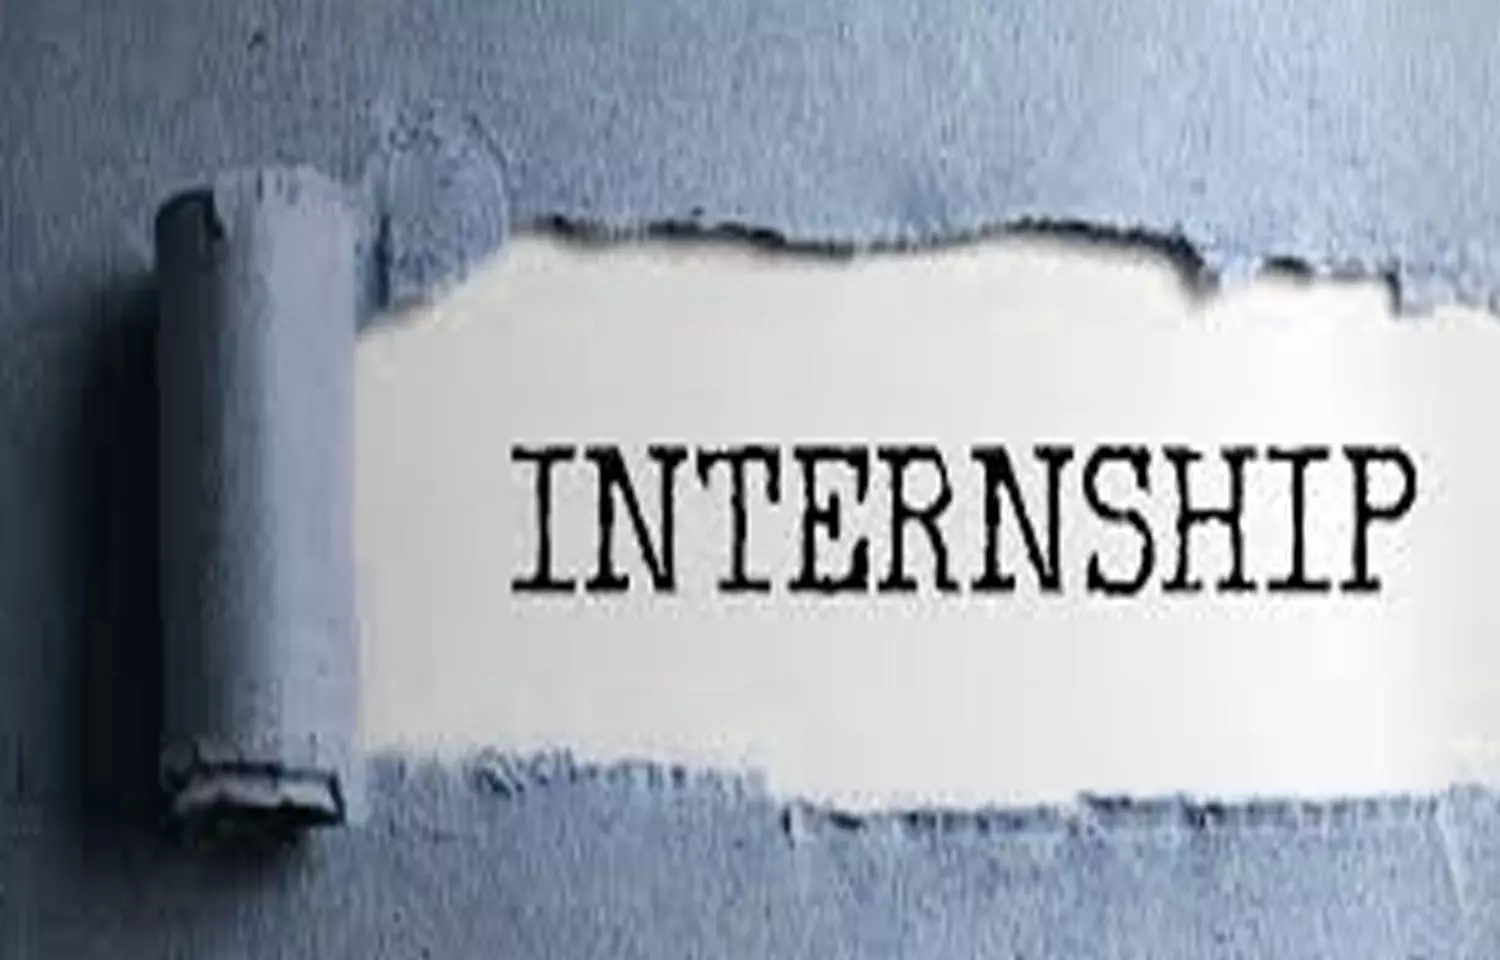 NMC Releases Guidelines For Completion Of MBBS Internship Post COVID-19 Lockdown, relaxes deadline